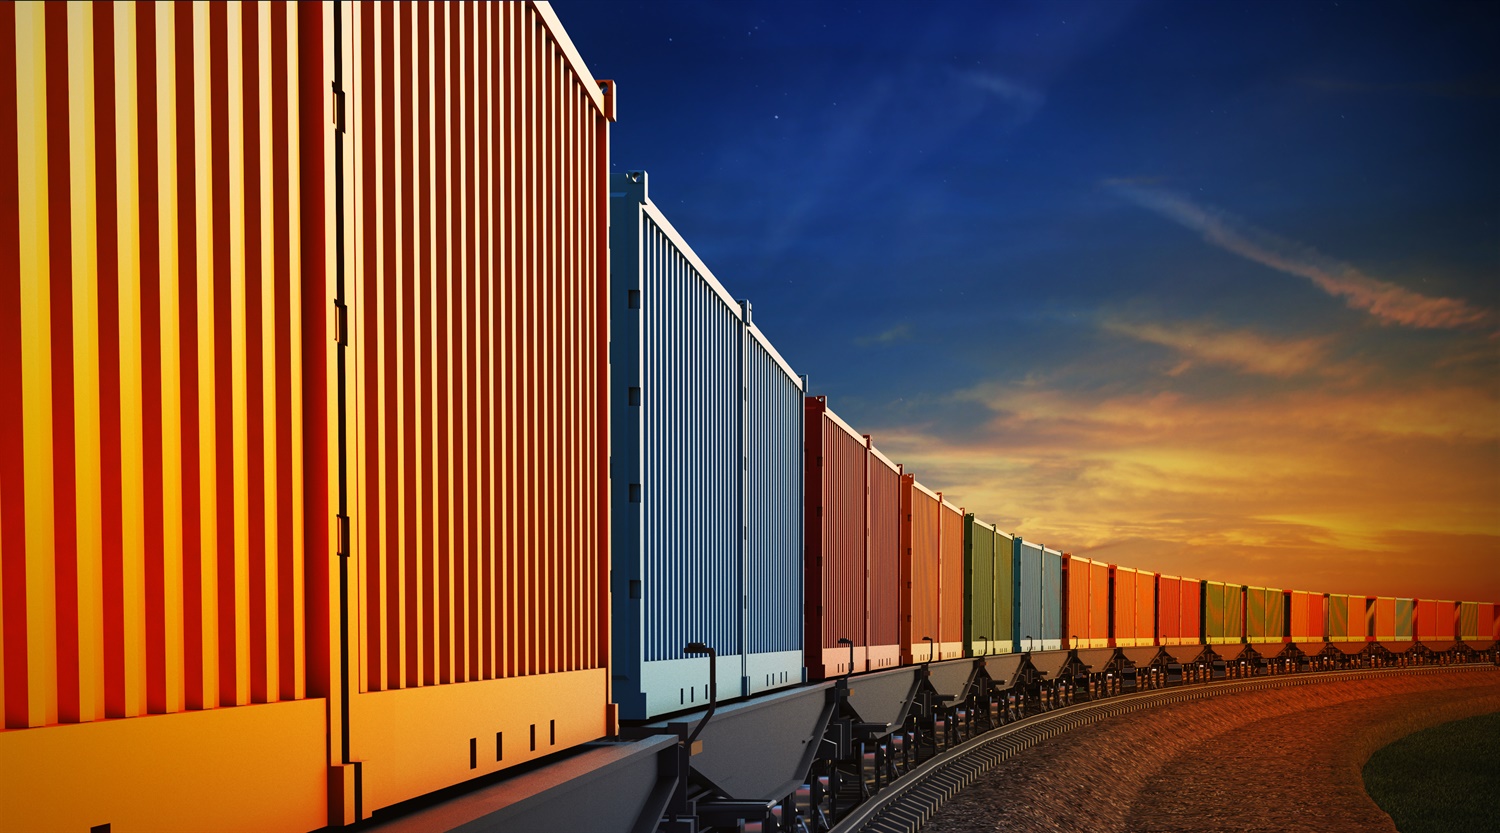 Lord Berkeley: The time for freight is now 